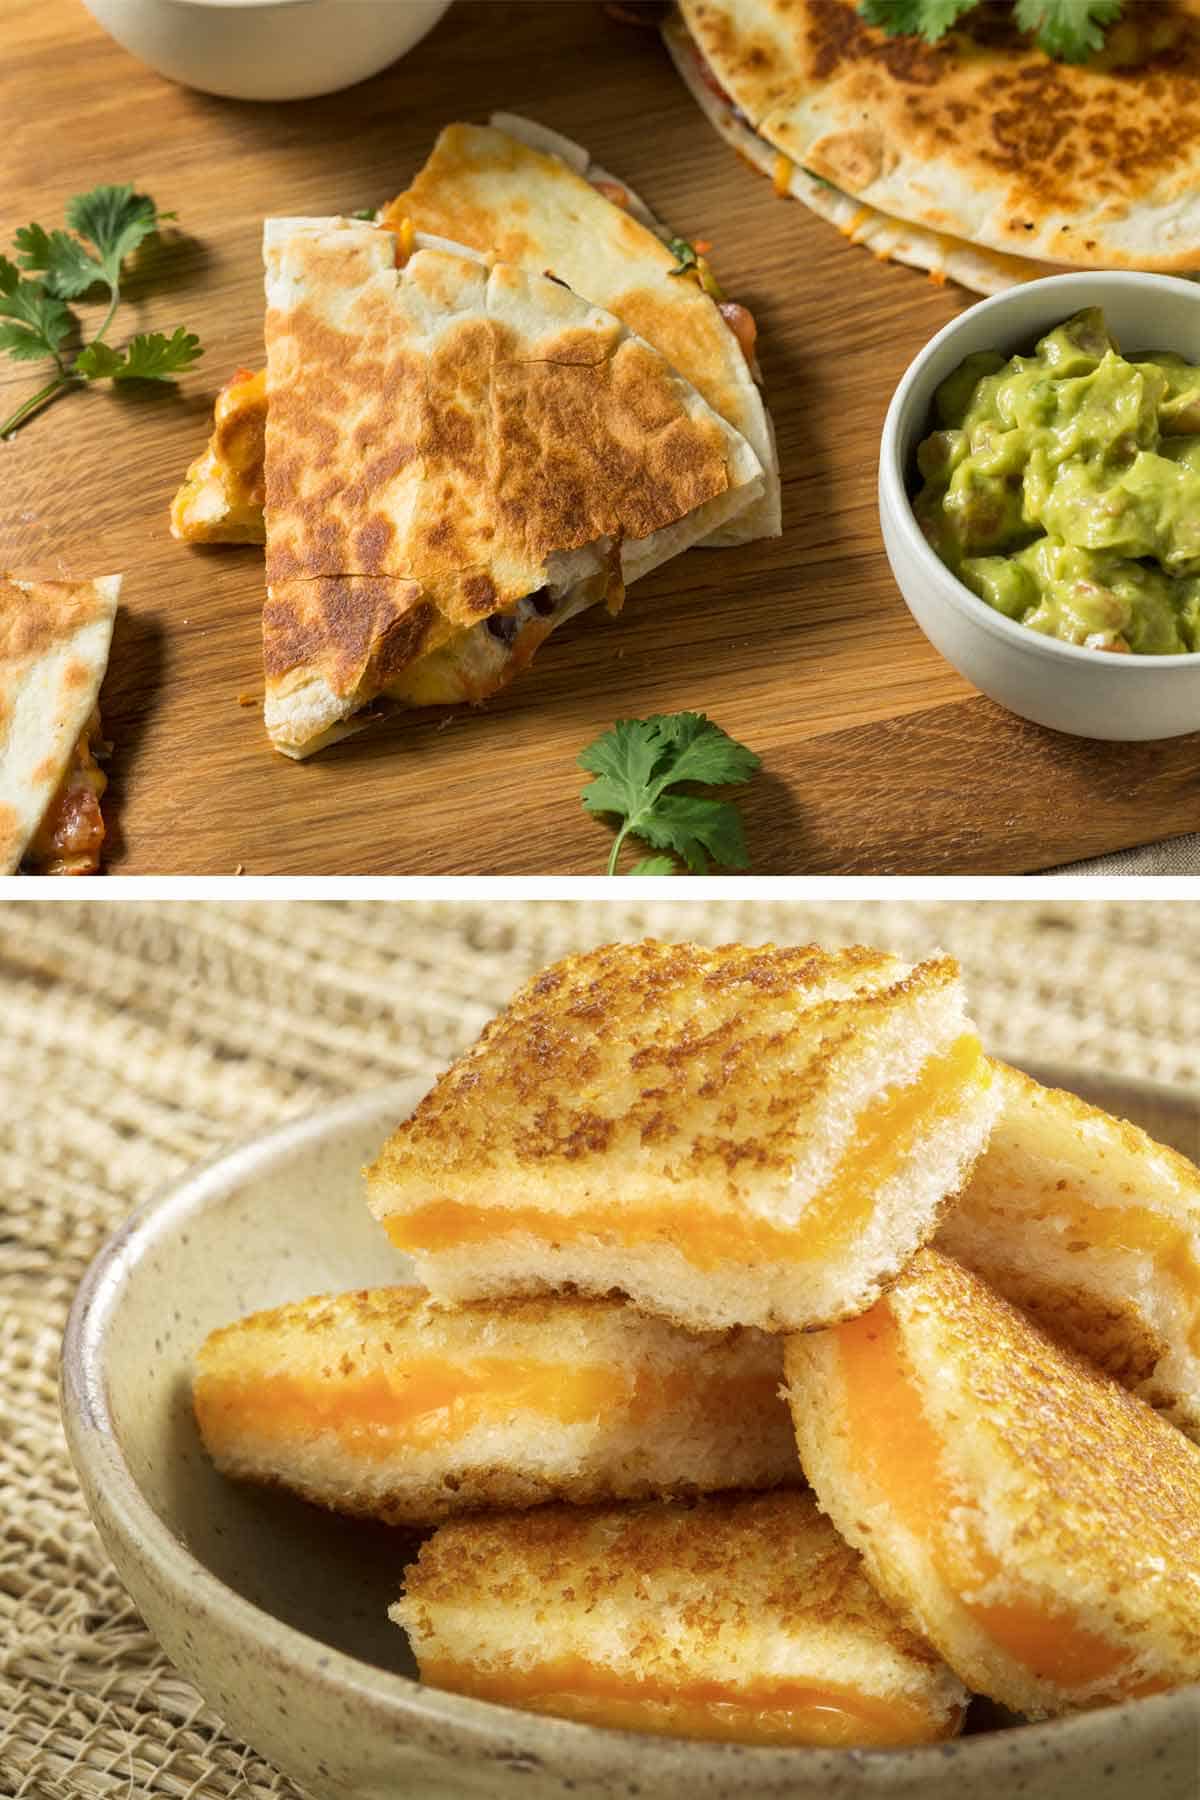 Quesadillas and grilled cheese sandwiches.